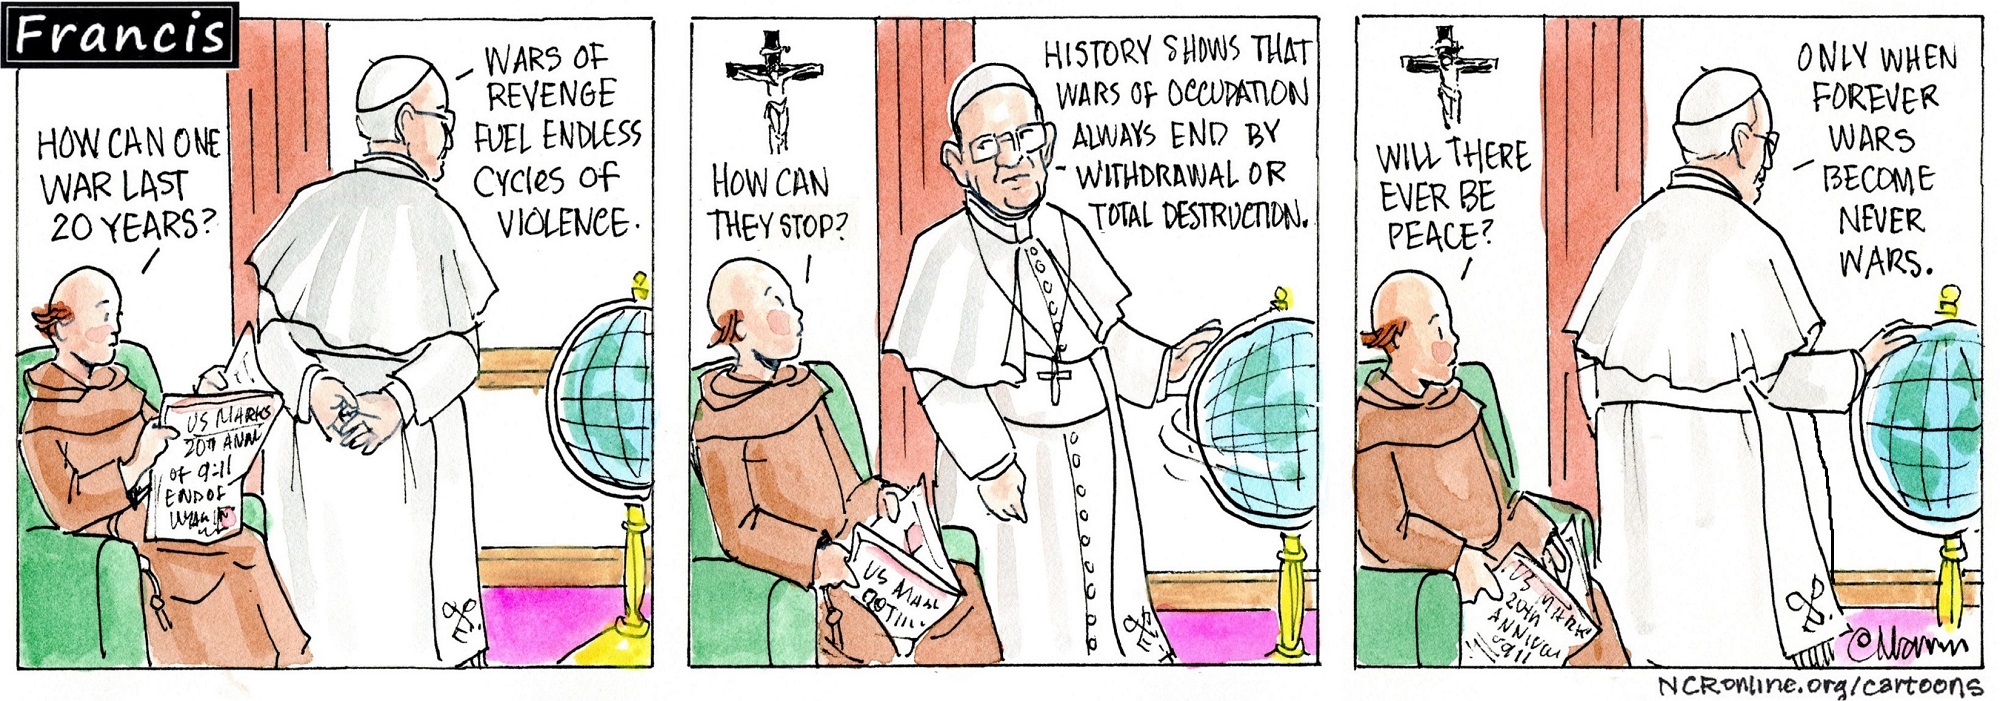 Francis, the comic strip: How can one war last 20 years?